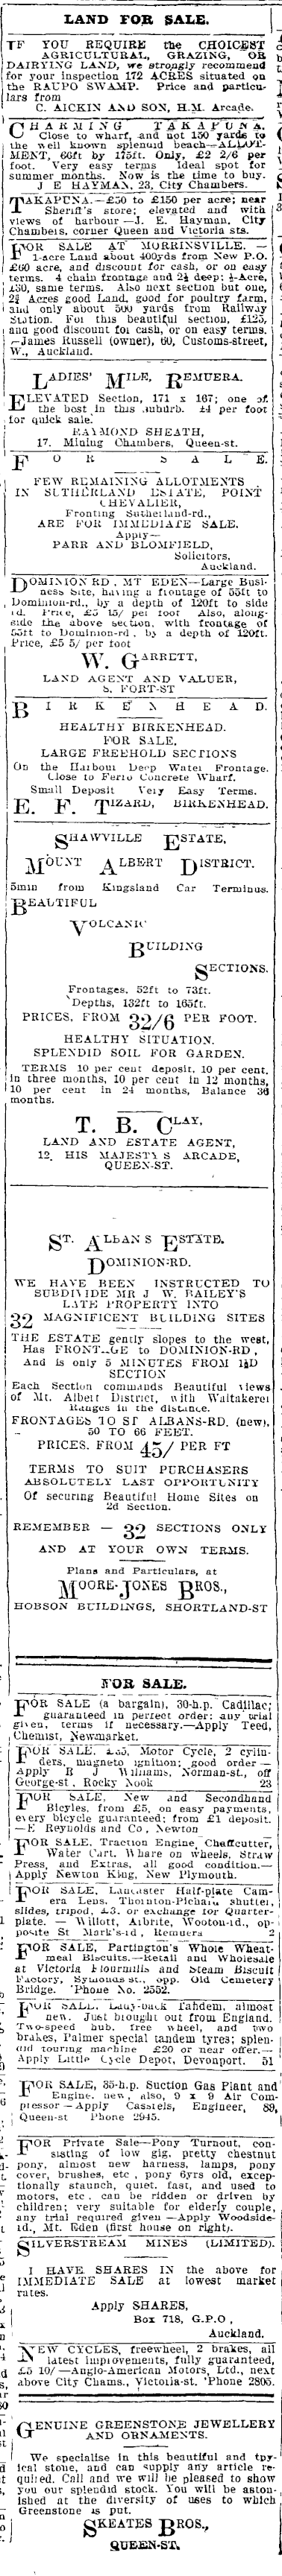 Papers Past | Newspapers | Auckland Star | 15 1909 | Page 2 Advertisements Column 4